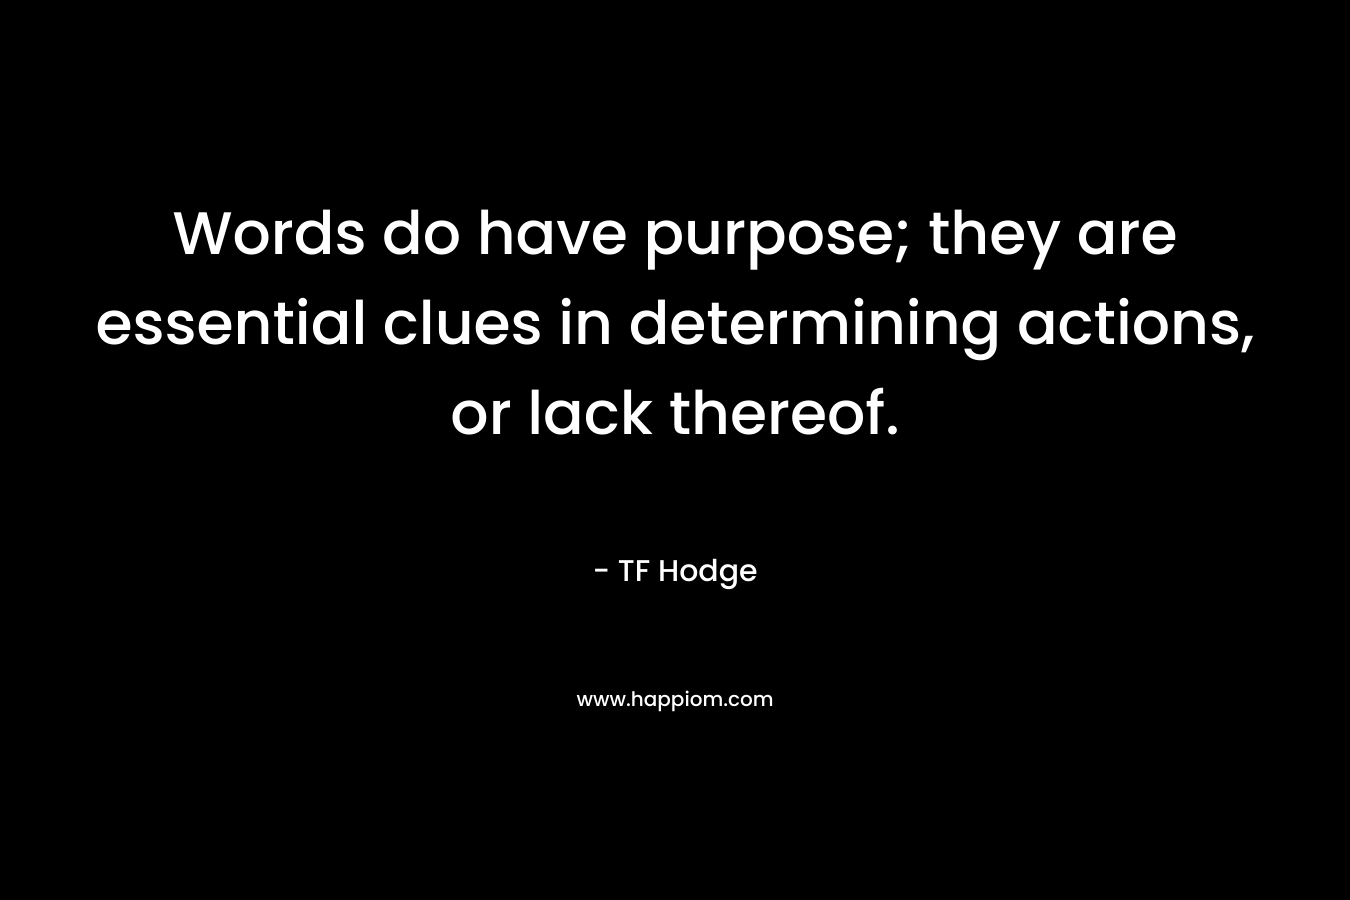 Words do have purpose; they are essential clues in determining actions, or lack thereof.